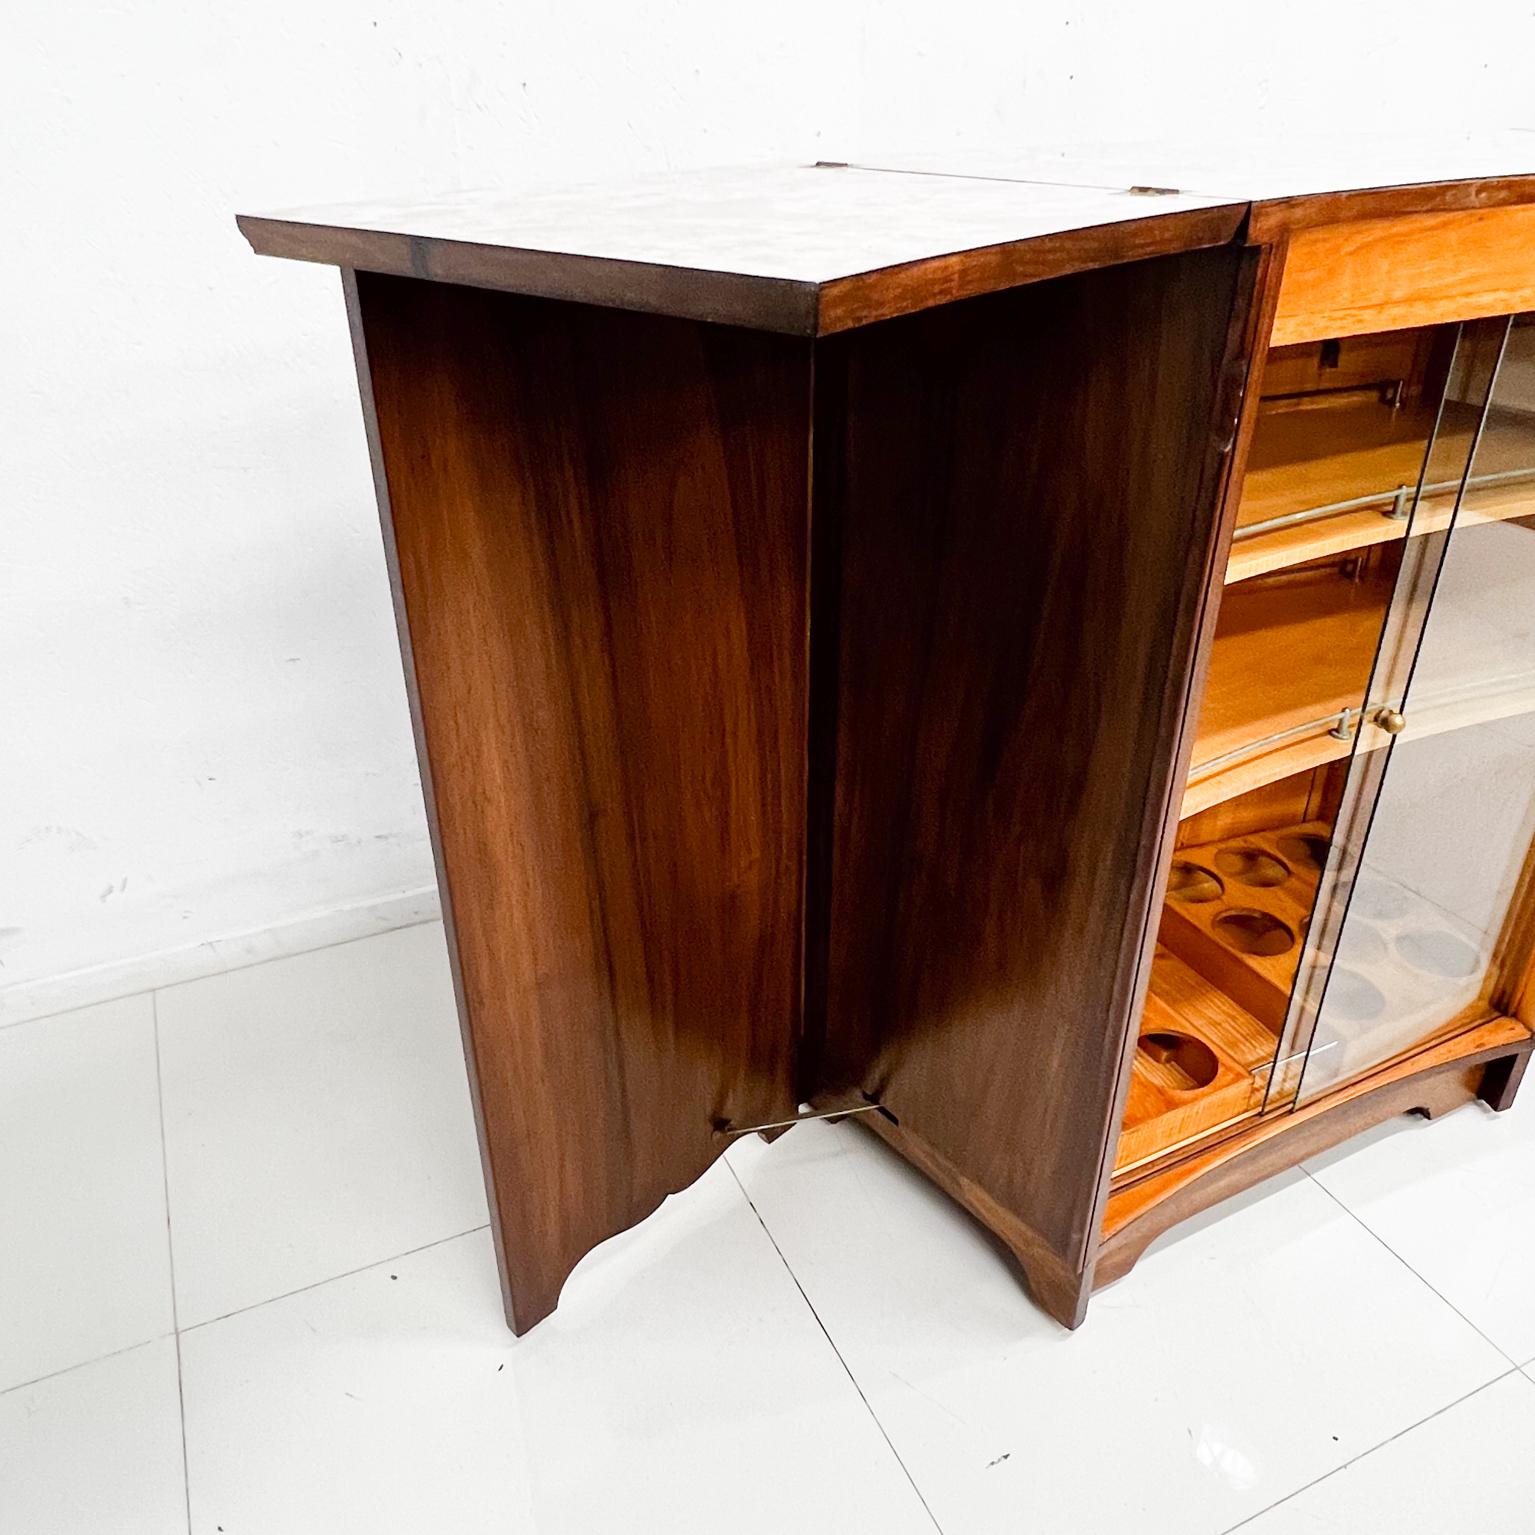 1930s Exquisite English Art Deco Cocktail Dry Bar Burlwood and Walnut 10